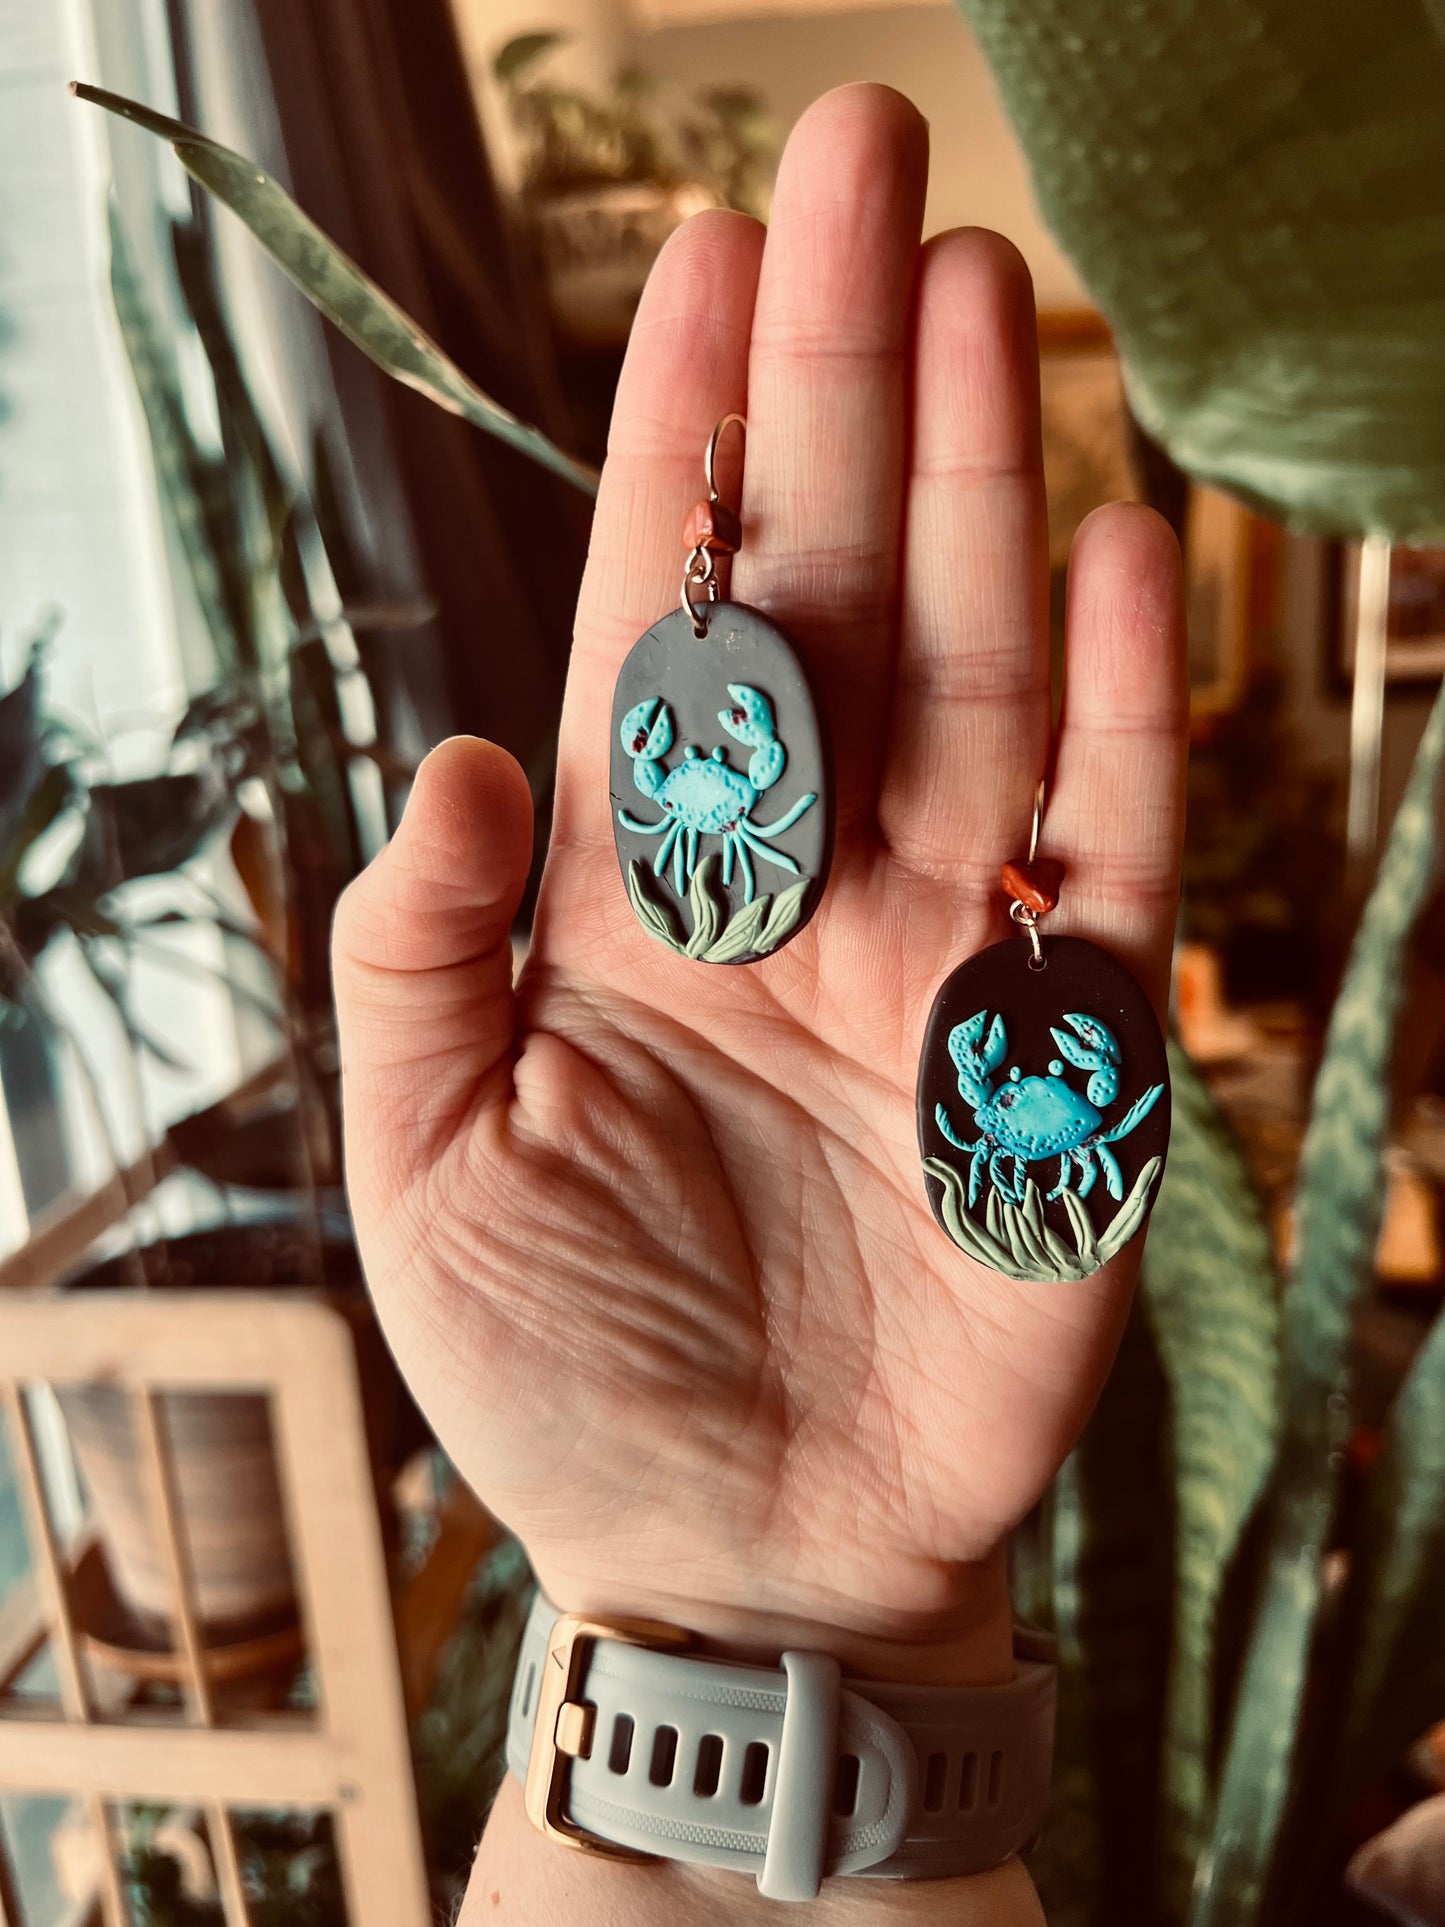 Intricate polymer clay Cancer earrings, meticulously hand-sculpted using Sculpey clay. Embrace the nurturing essence of the Cancer zodiac sign with these artisanal earrings, symbolizing emotional depth and intuitive energy.  These earrings depict a blue crab in the depths of the ocean entangled in seaweed.